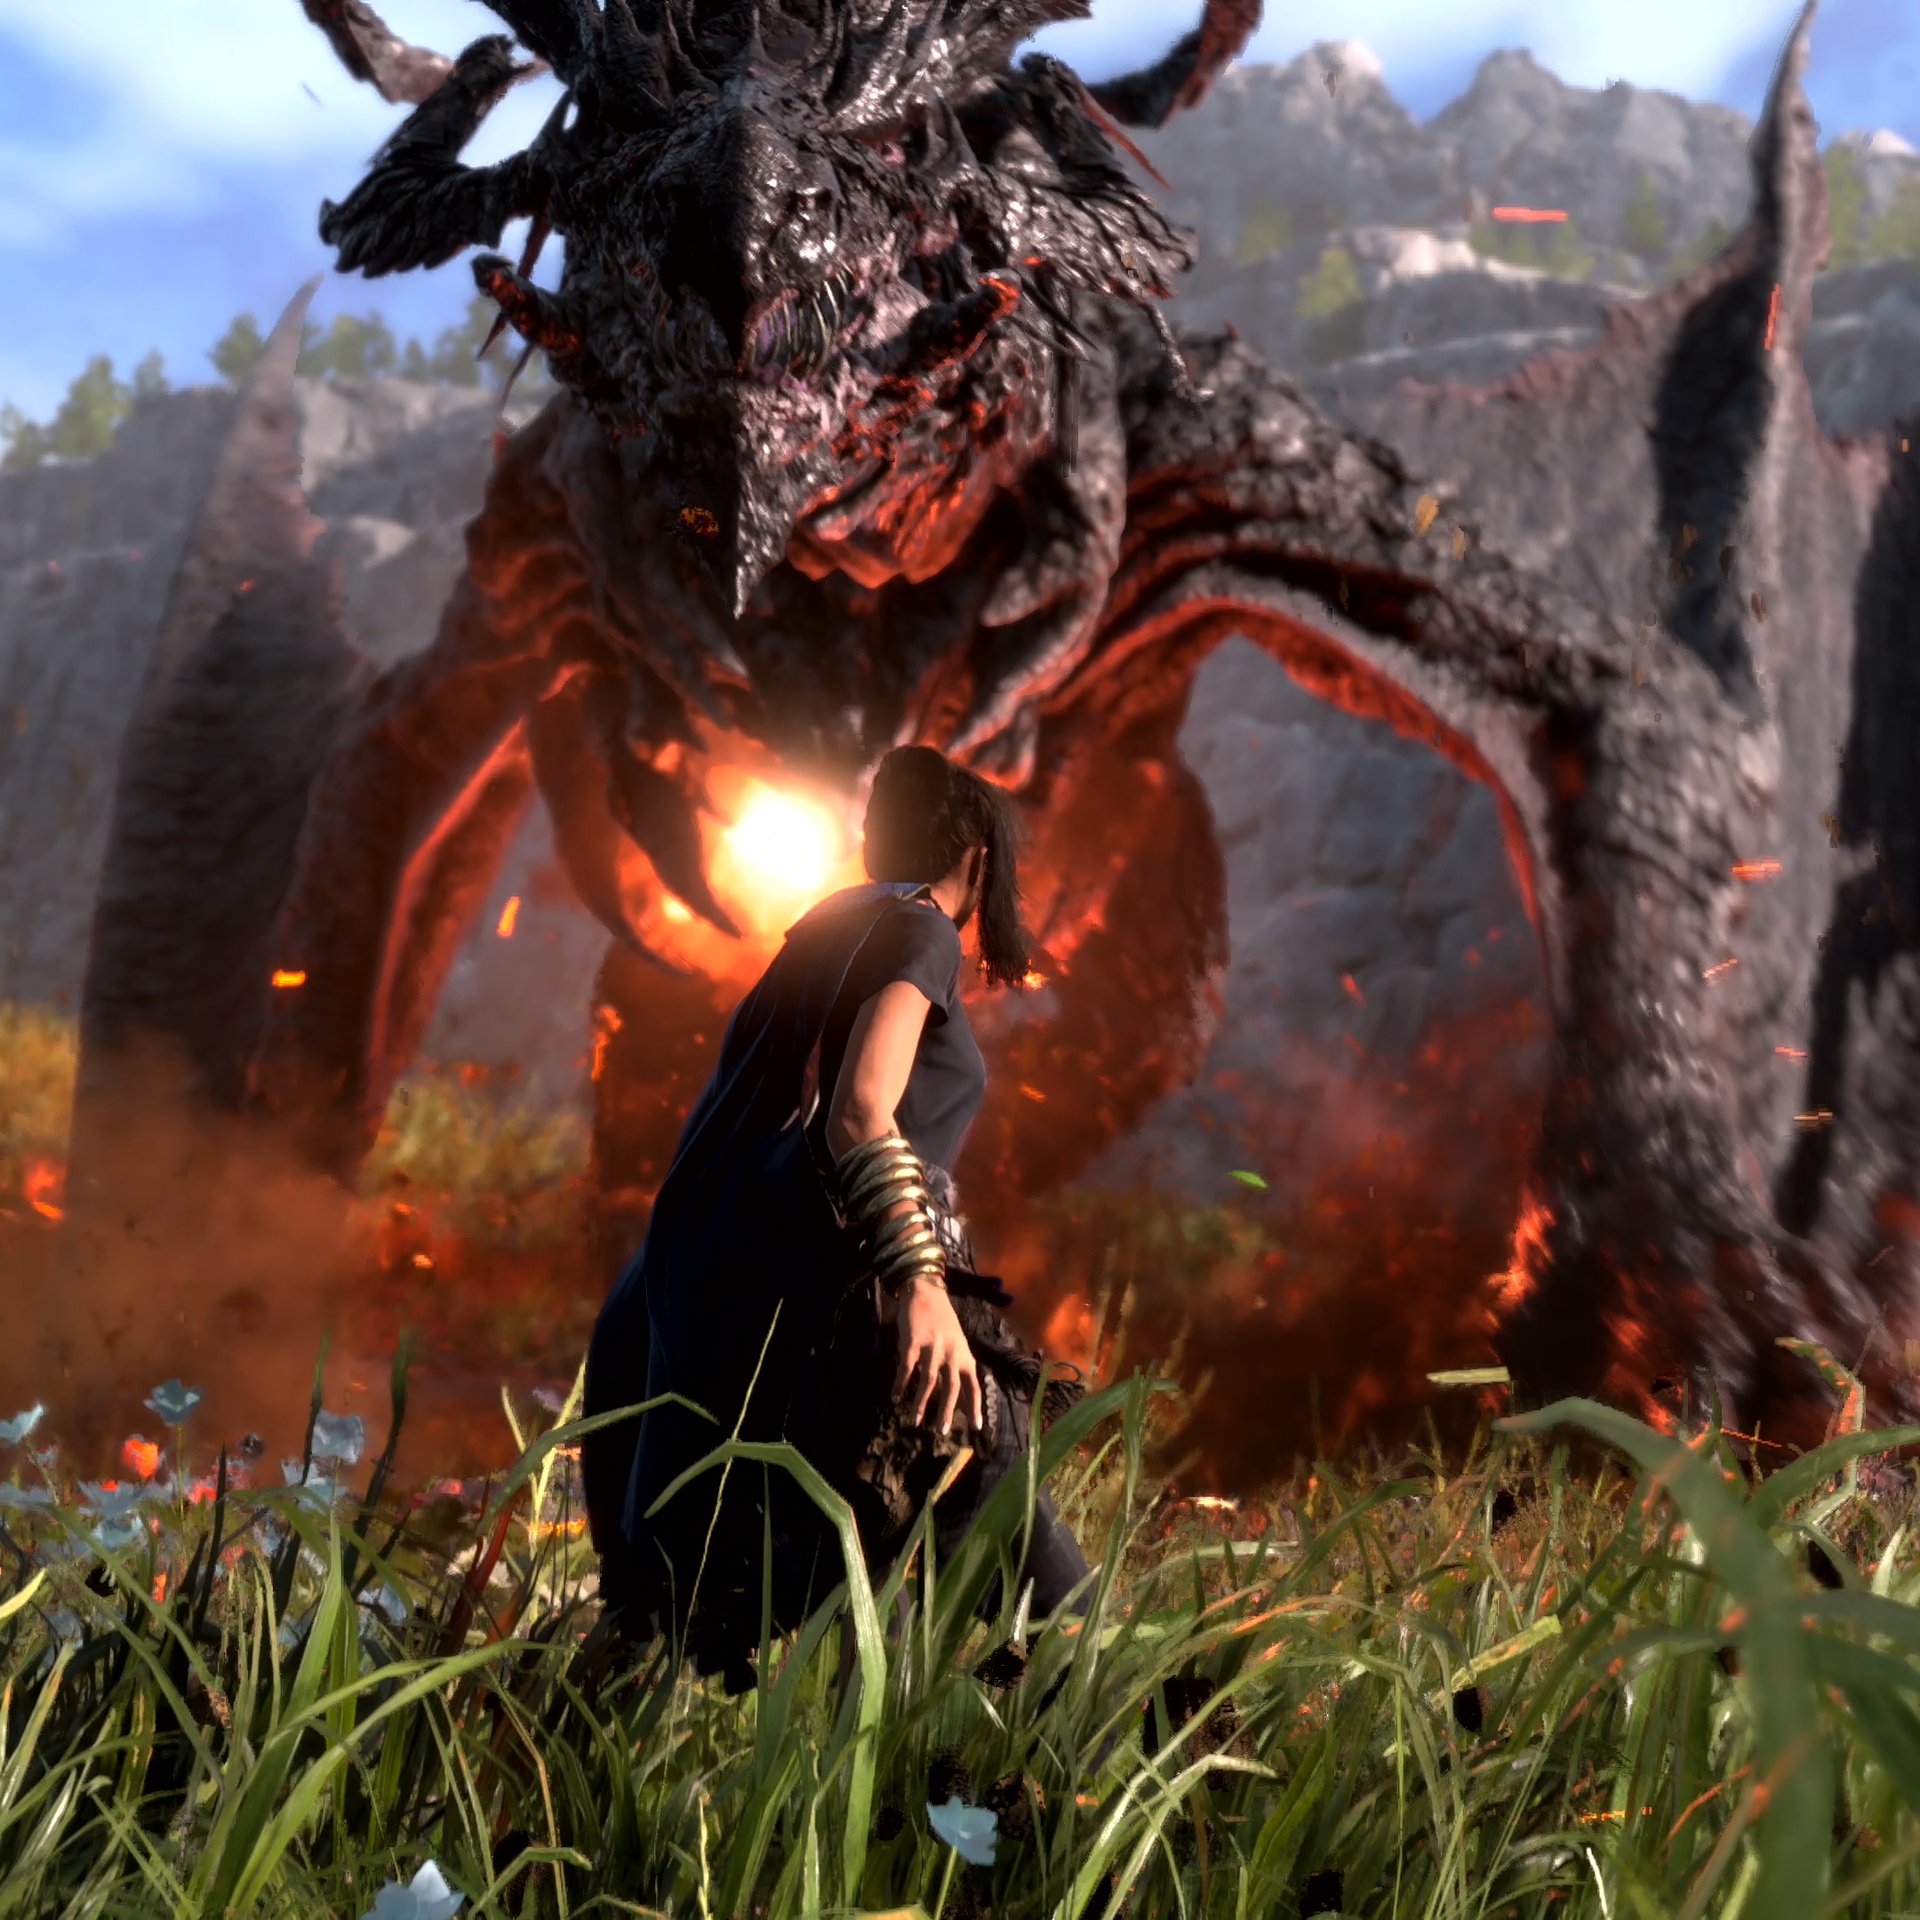 Lord of the Rings MMO video game coming from  Games - Polygon